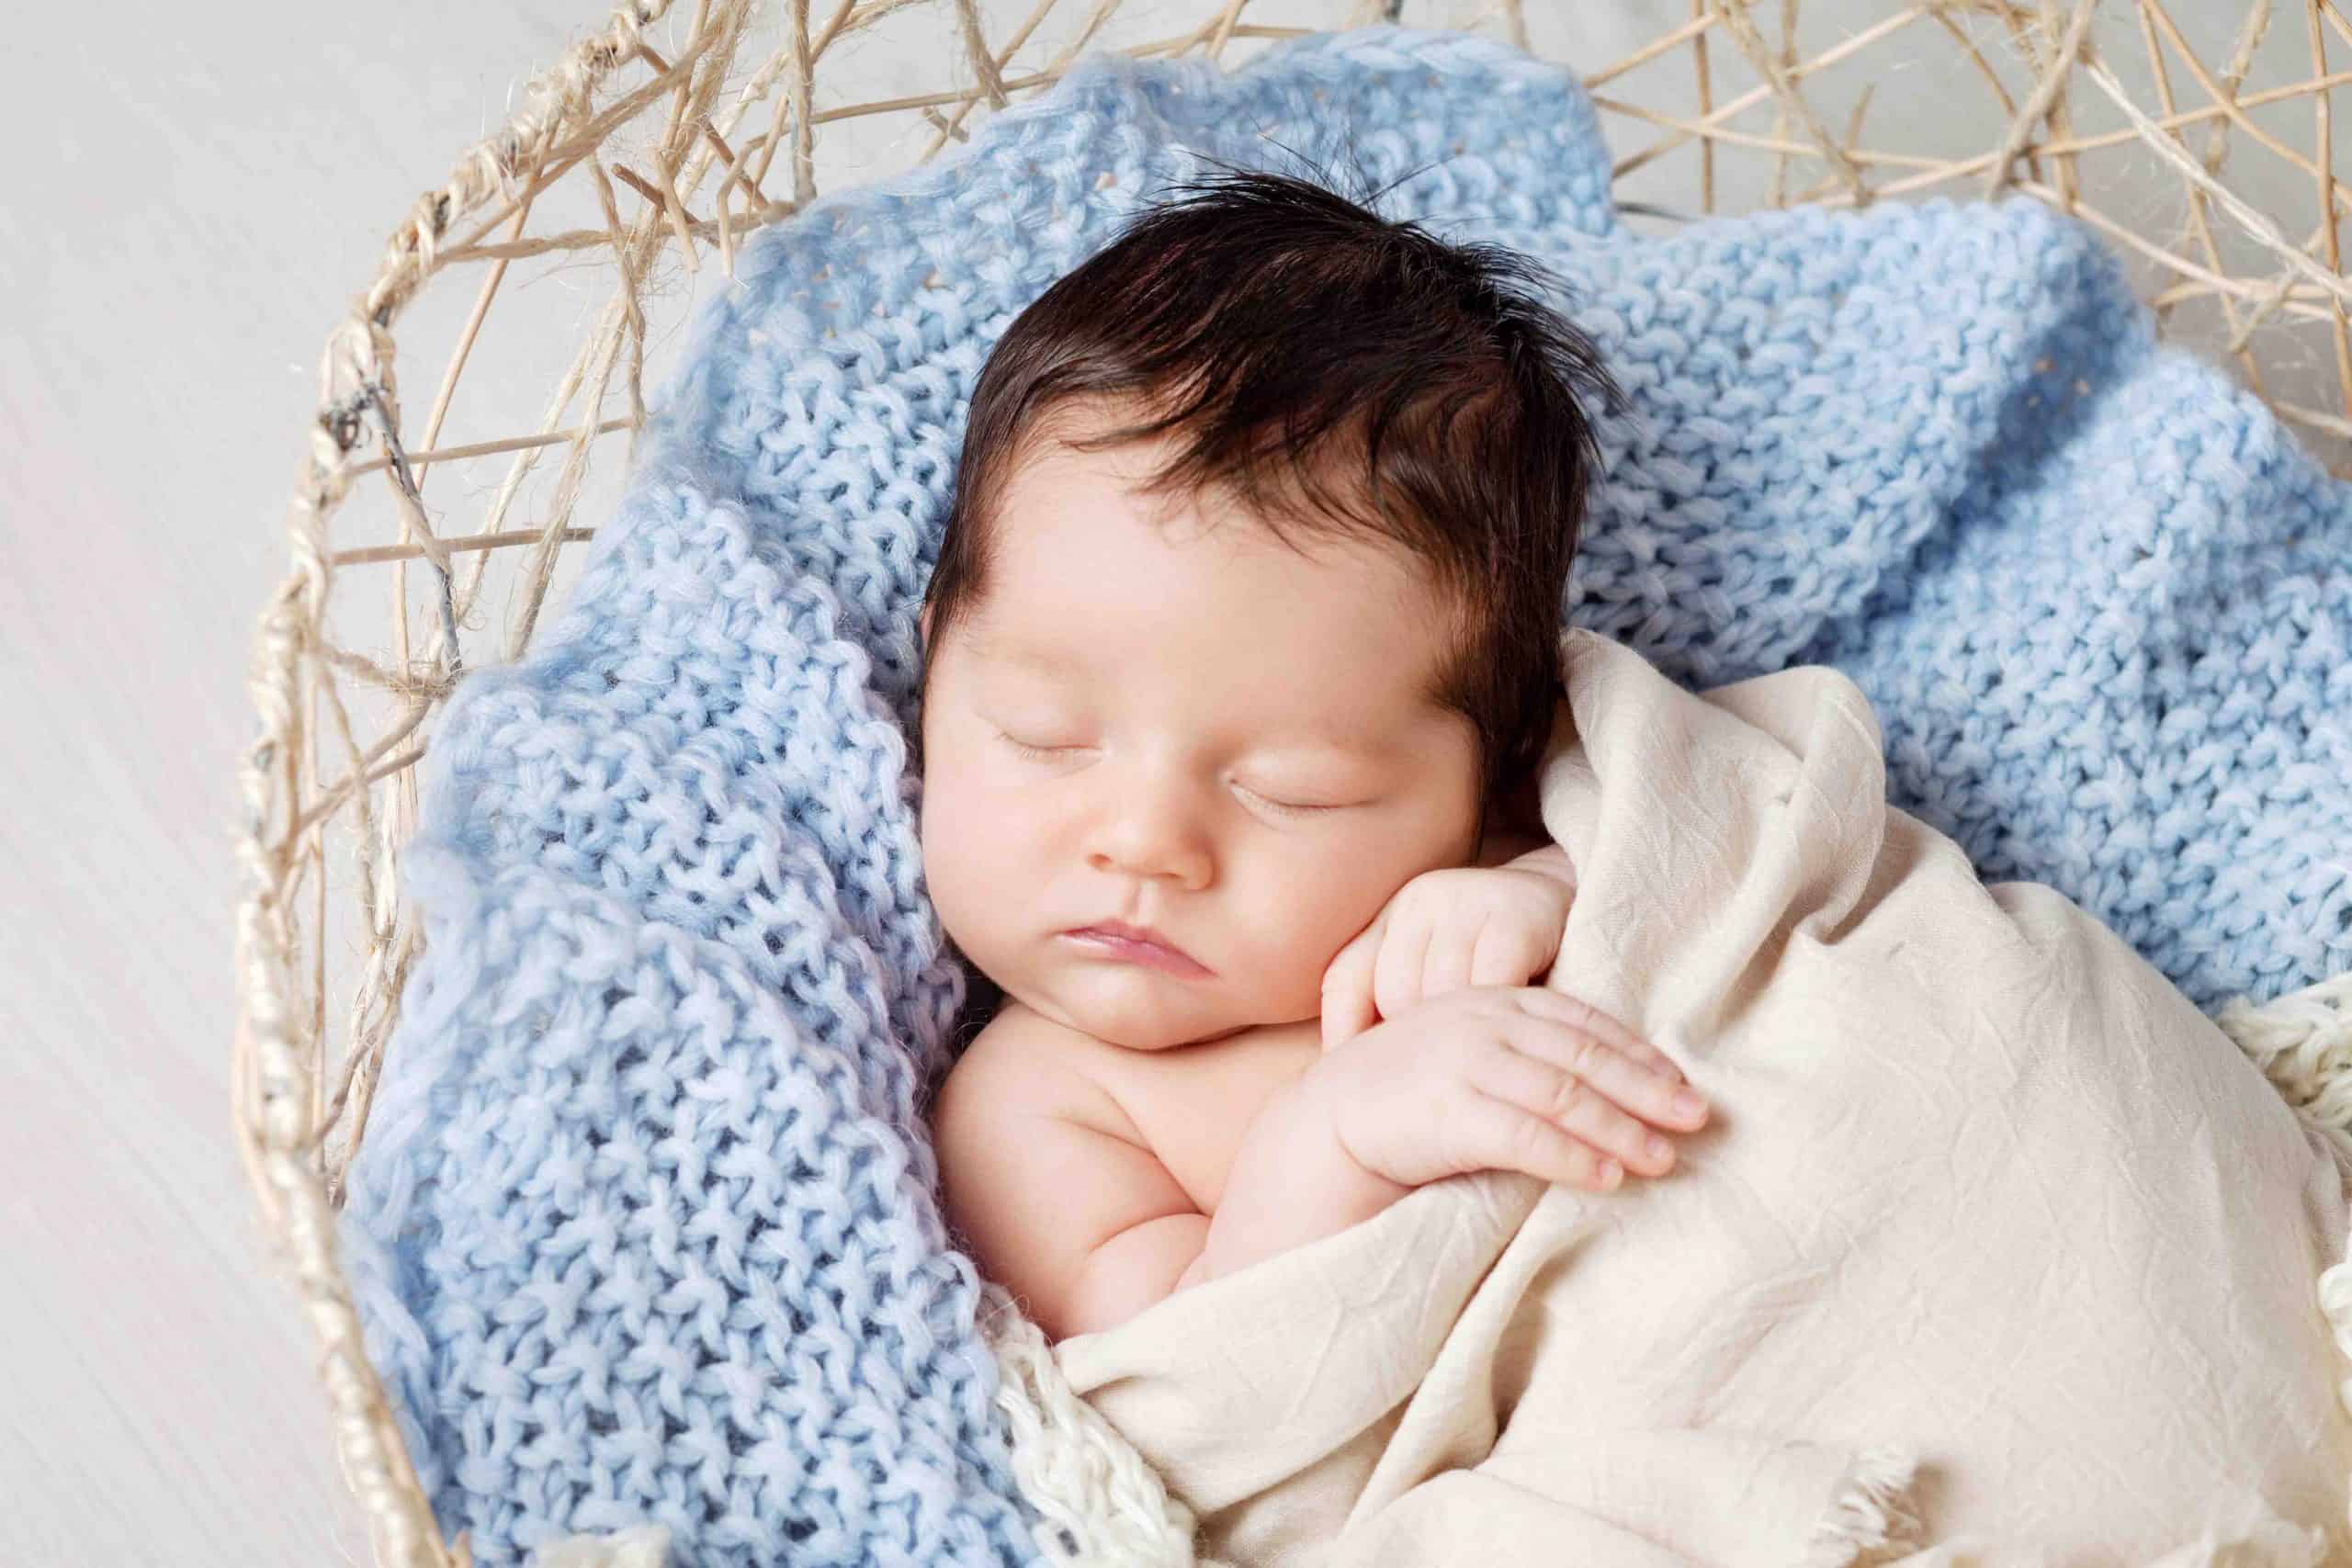 What Is a Baby Receiving Blanket? Why Do New Parents Need It?